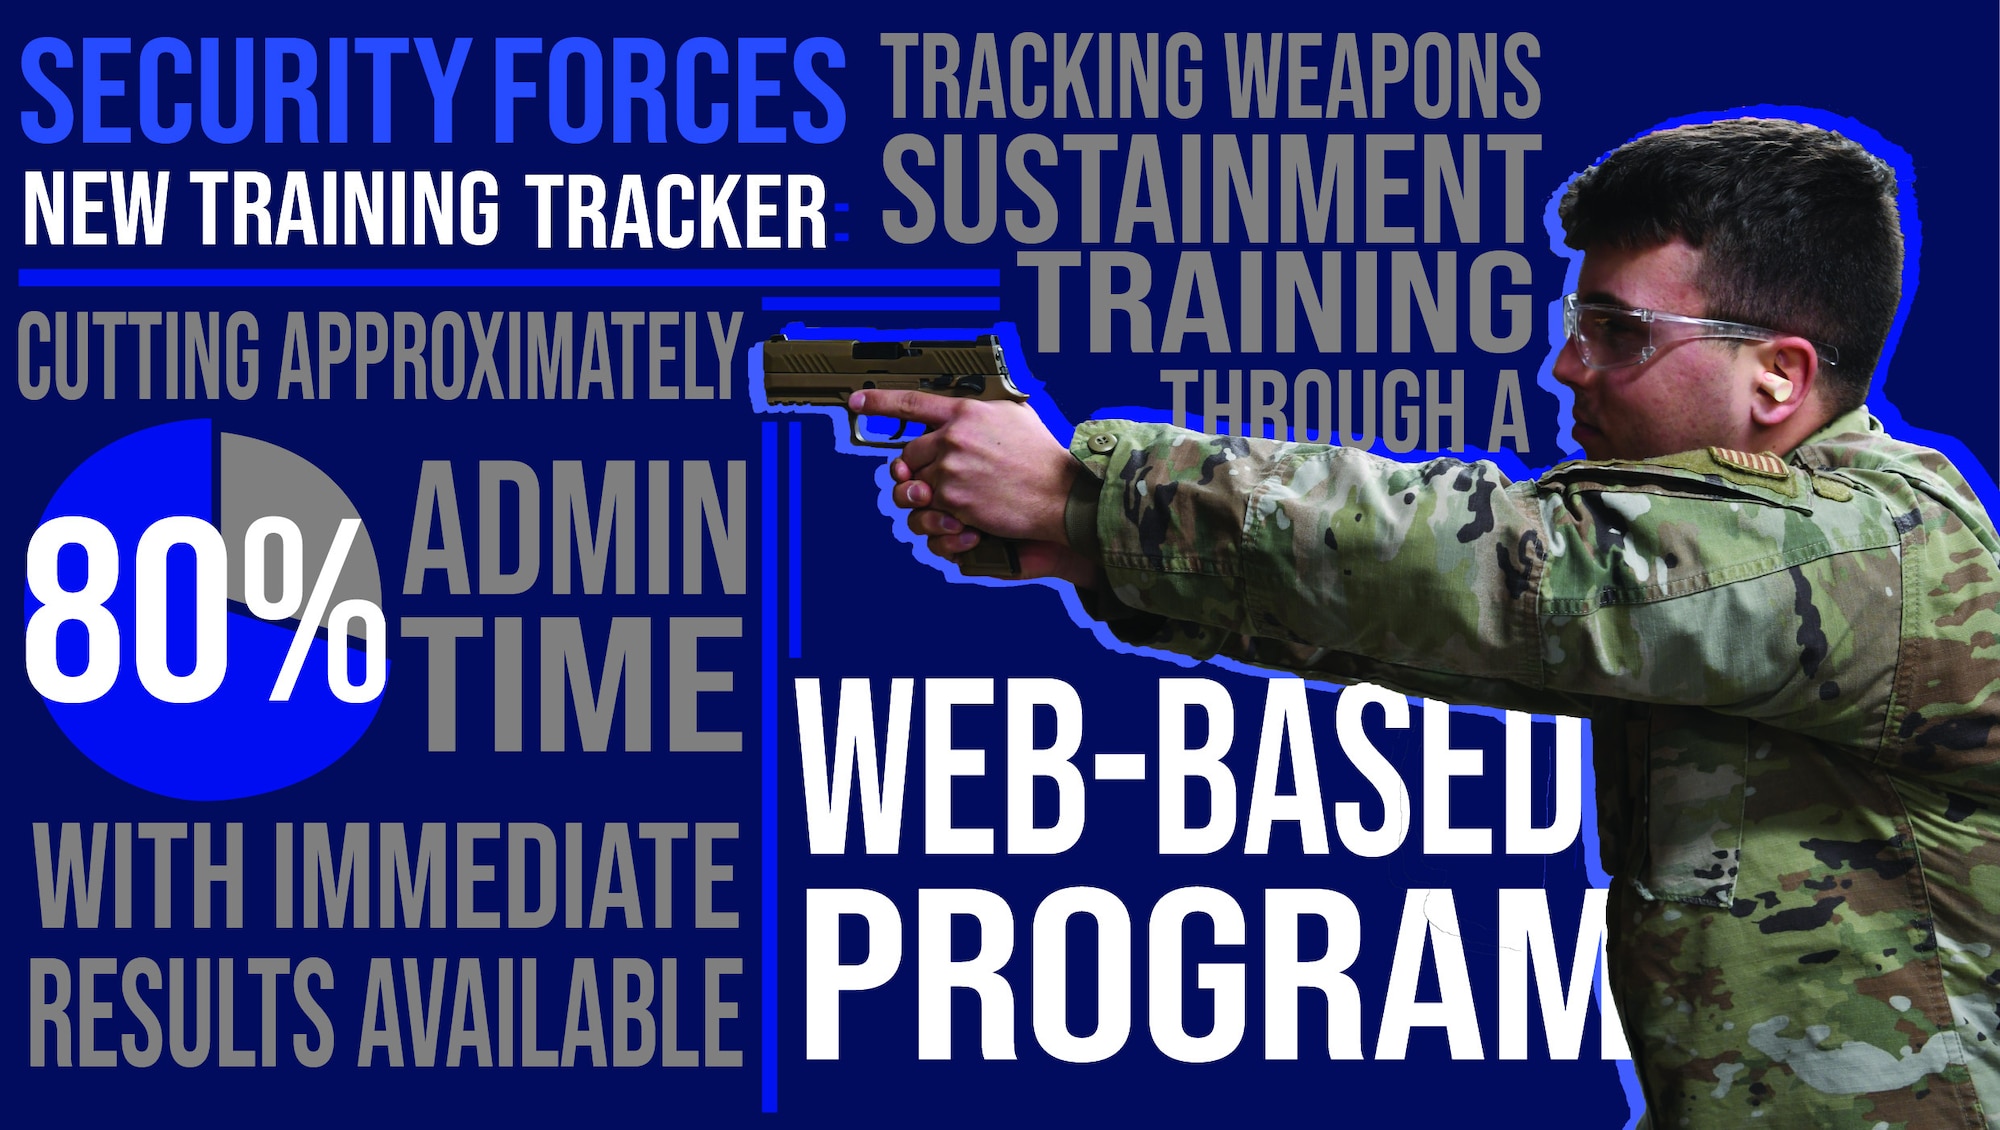 this is and infographic of a security forces member drawing their weapon with information about a new training tracker that the 319 SFS has recently started using.